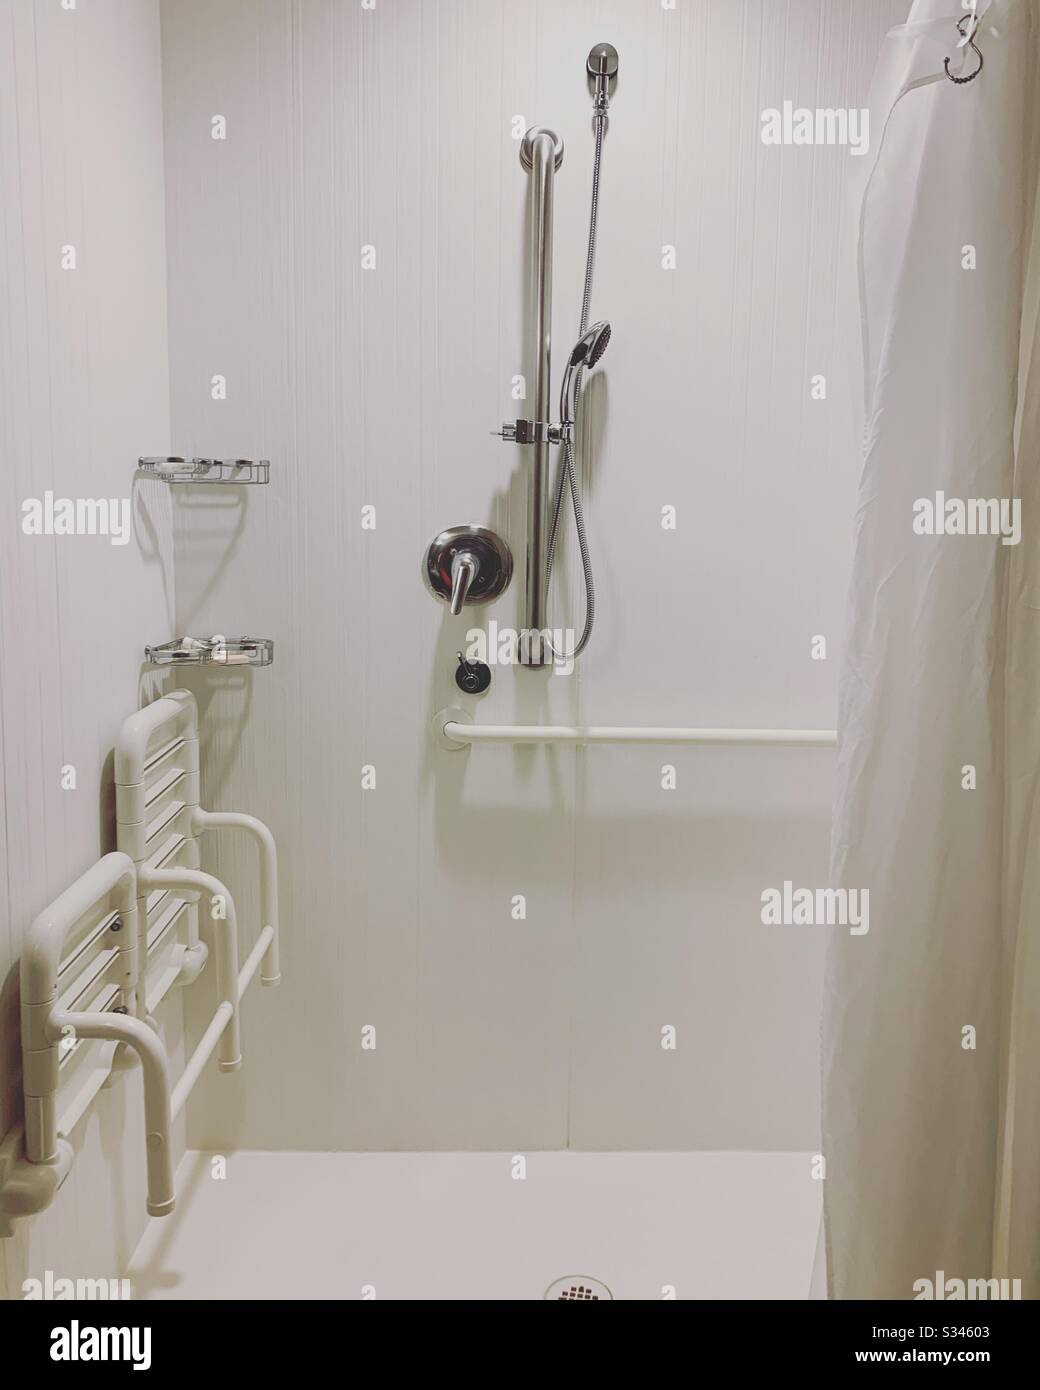 https://c8.alamy.com/comp/S34603/roll-in-shower-in-a-hotel-in-the-united-states-S34603.jpg